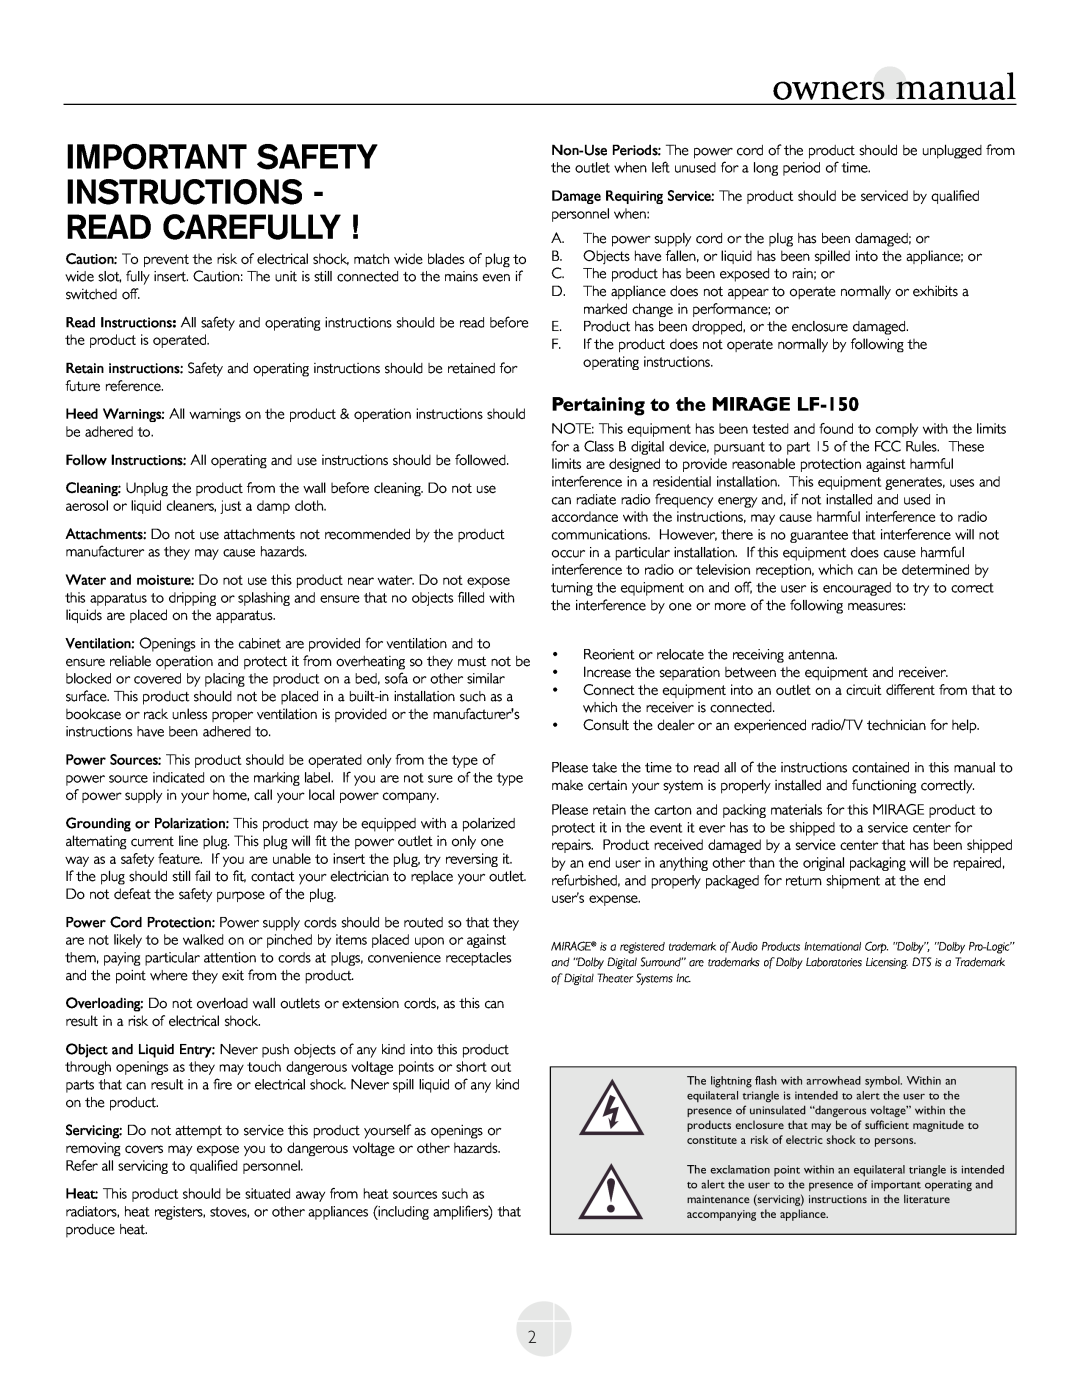 Mirage Loudspeakers LF-100 owner manual Important Safety Instructions Read Carefully, Pertaining to the MIRAGE LF-150 